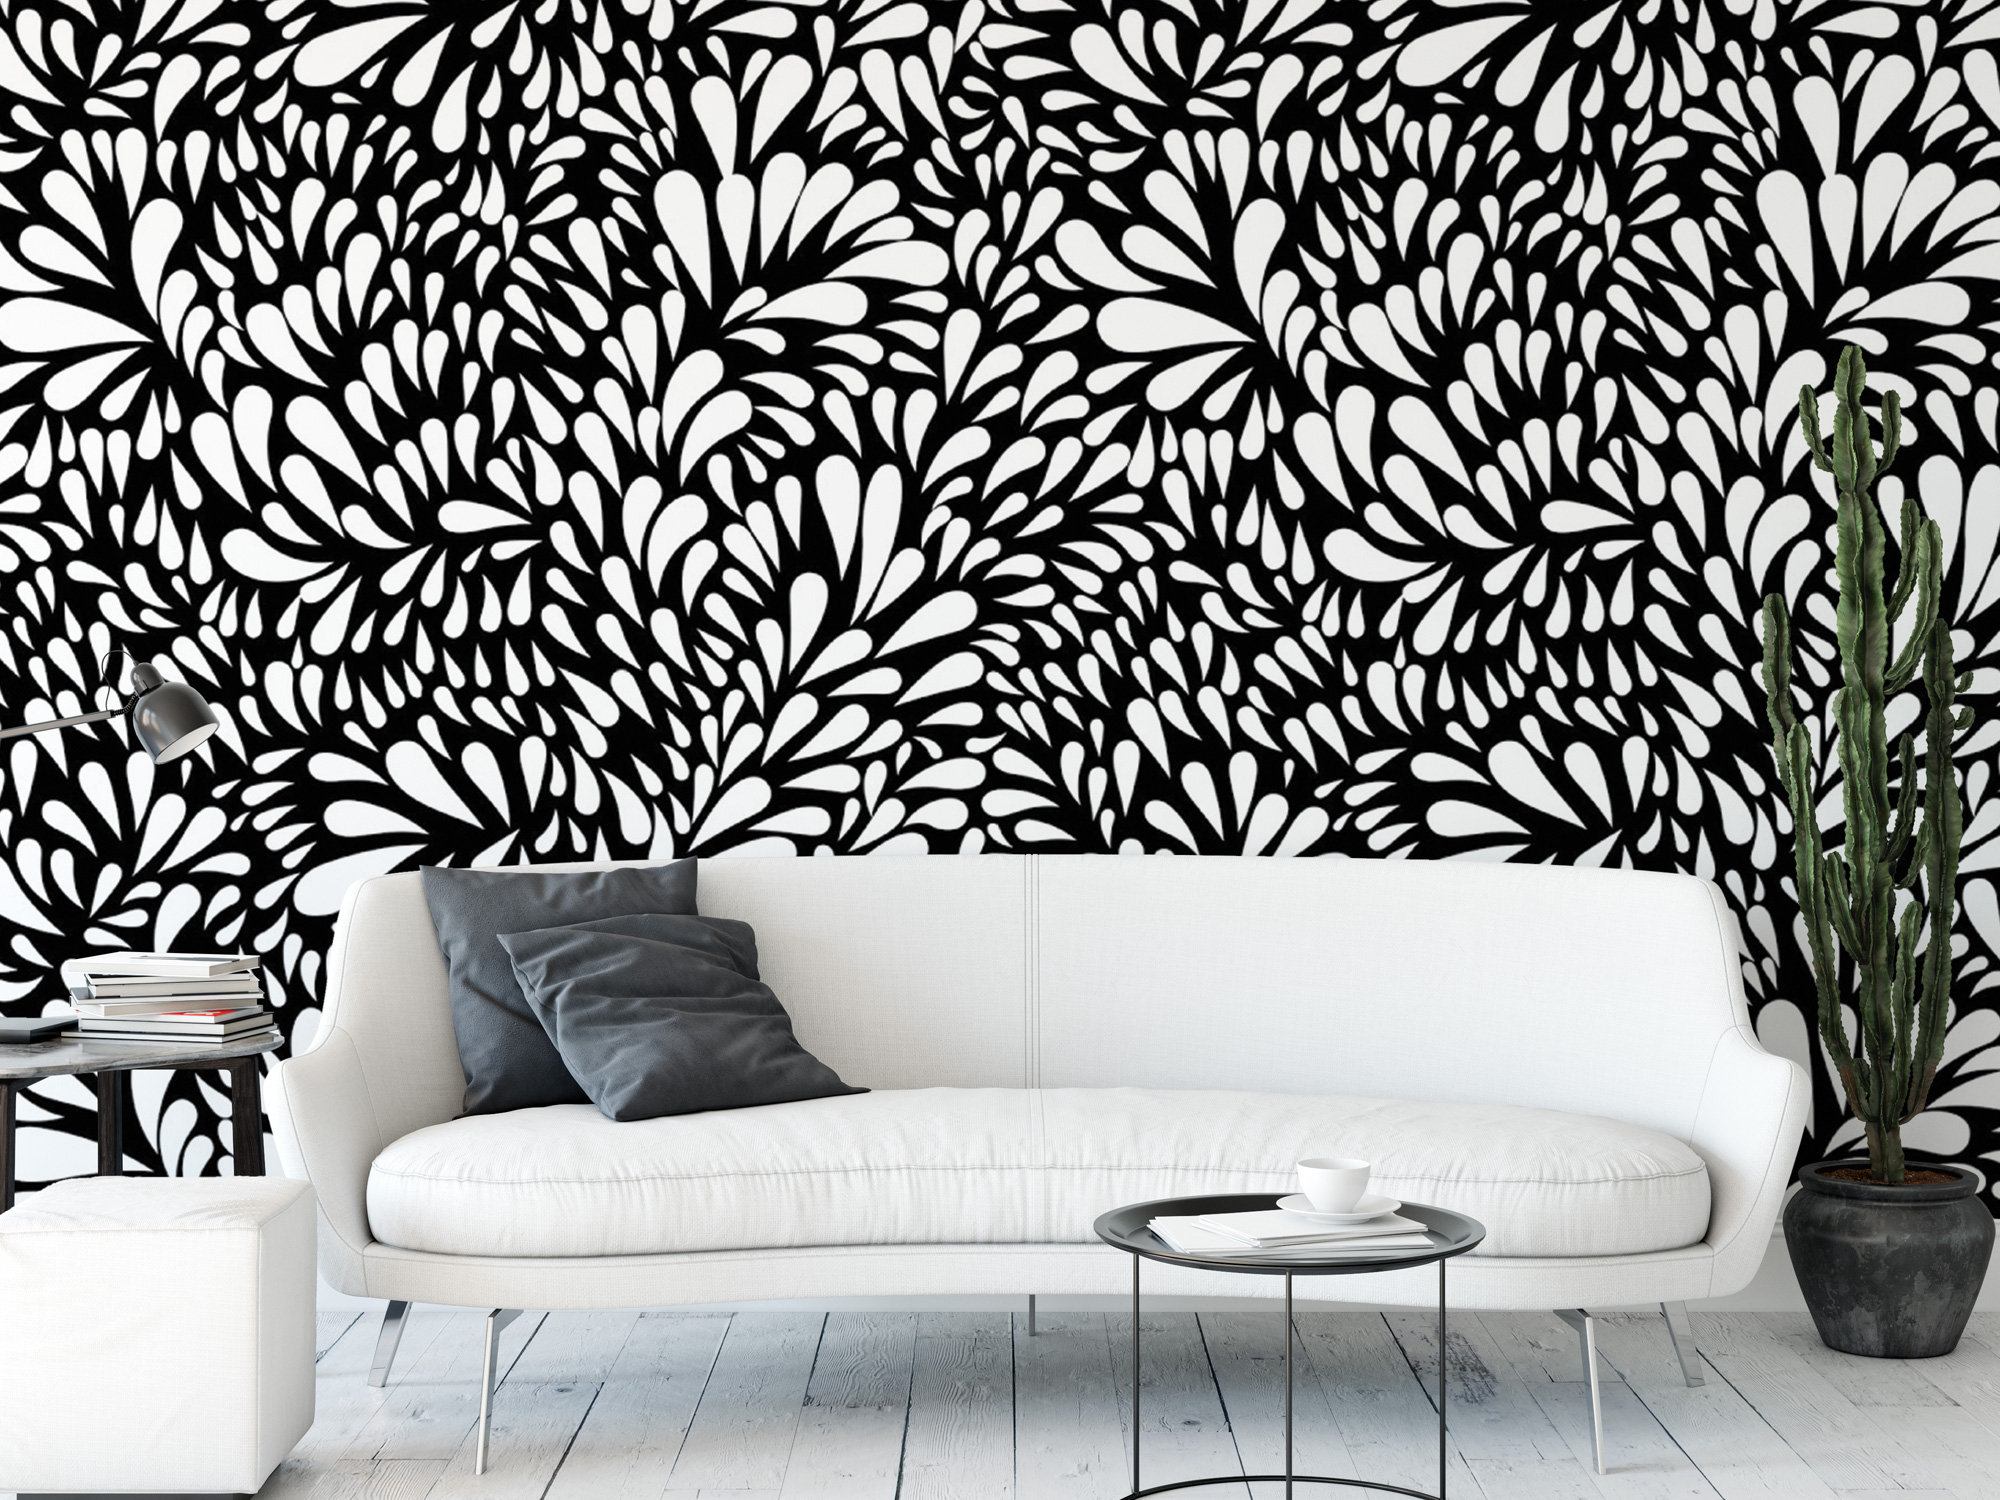 Black and White Peel and Stick Wallpaper  Contact Paper or Wall Paper  Self  Adhesive Wallpaper  Easily Removable Wallpaper  Black and White Wallpaper  Circles  1771 Wide x 118 Long  Amazonin Home Improvement